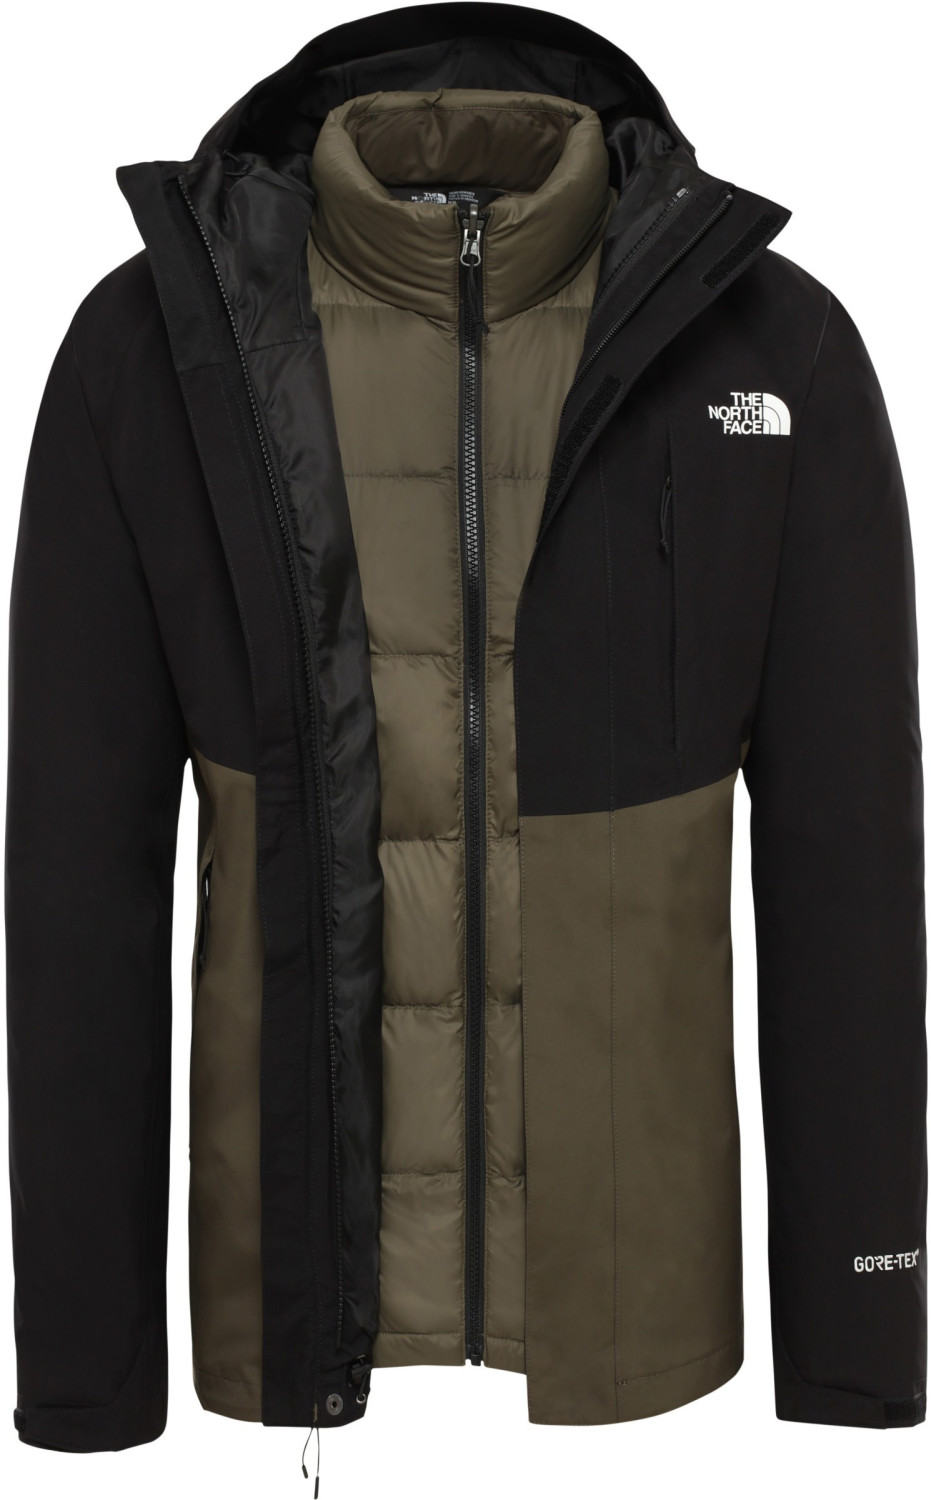 The North Face Men's Mountain Light Triclimate Jacket new taupe green